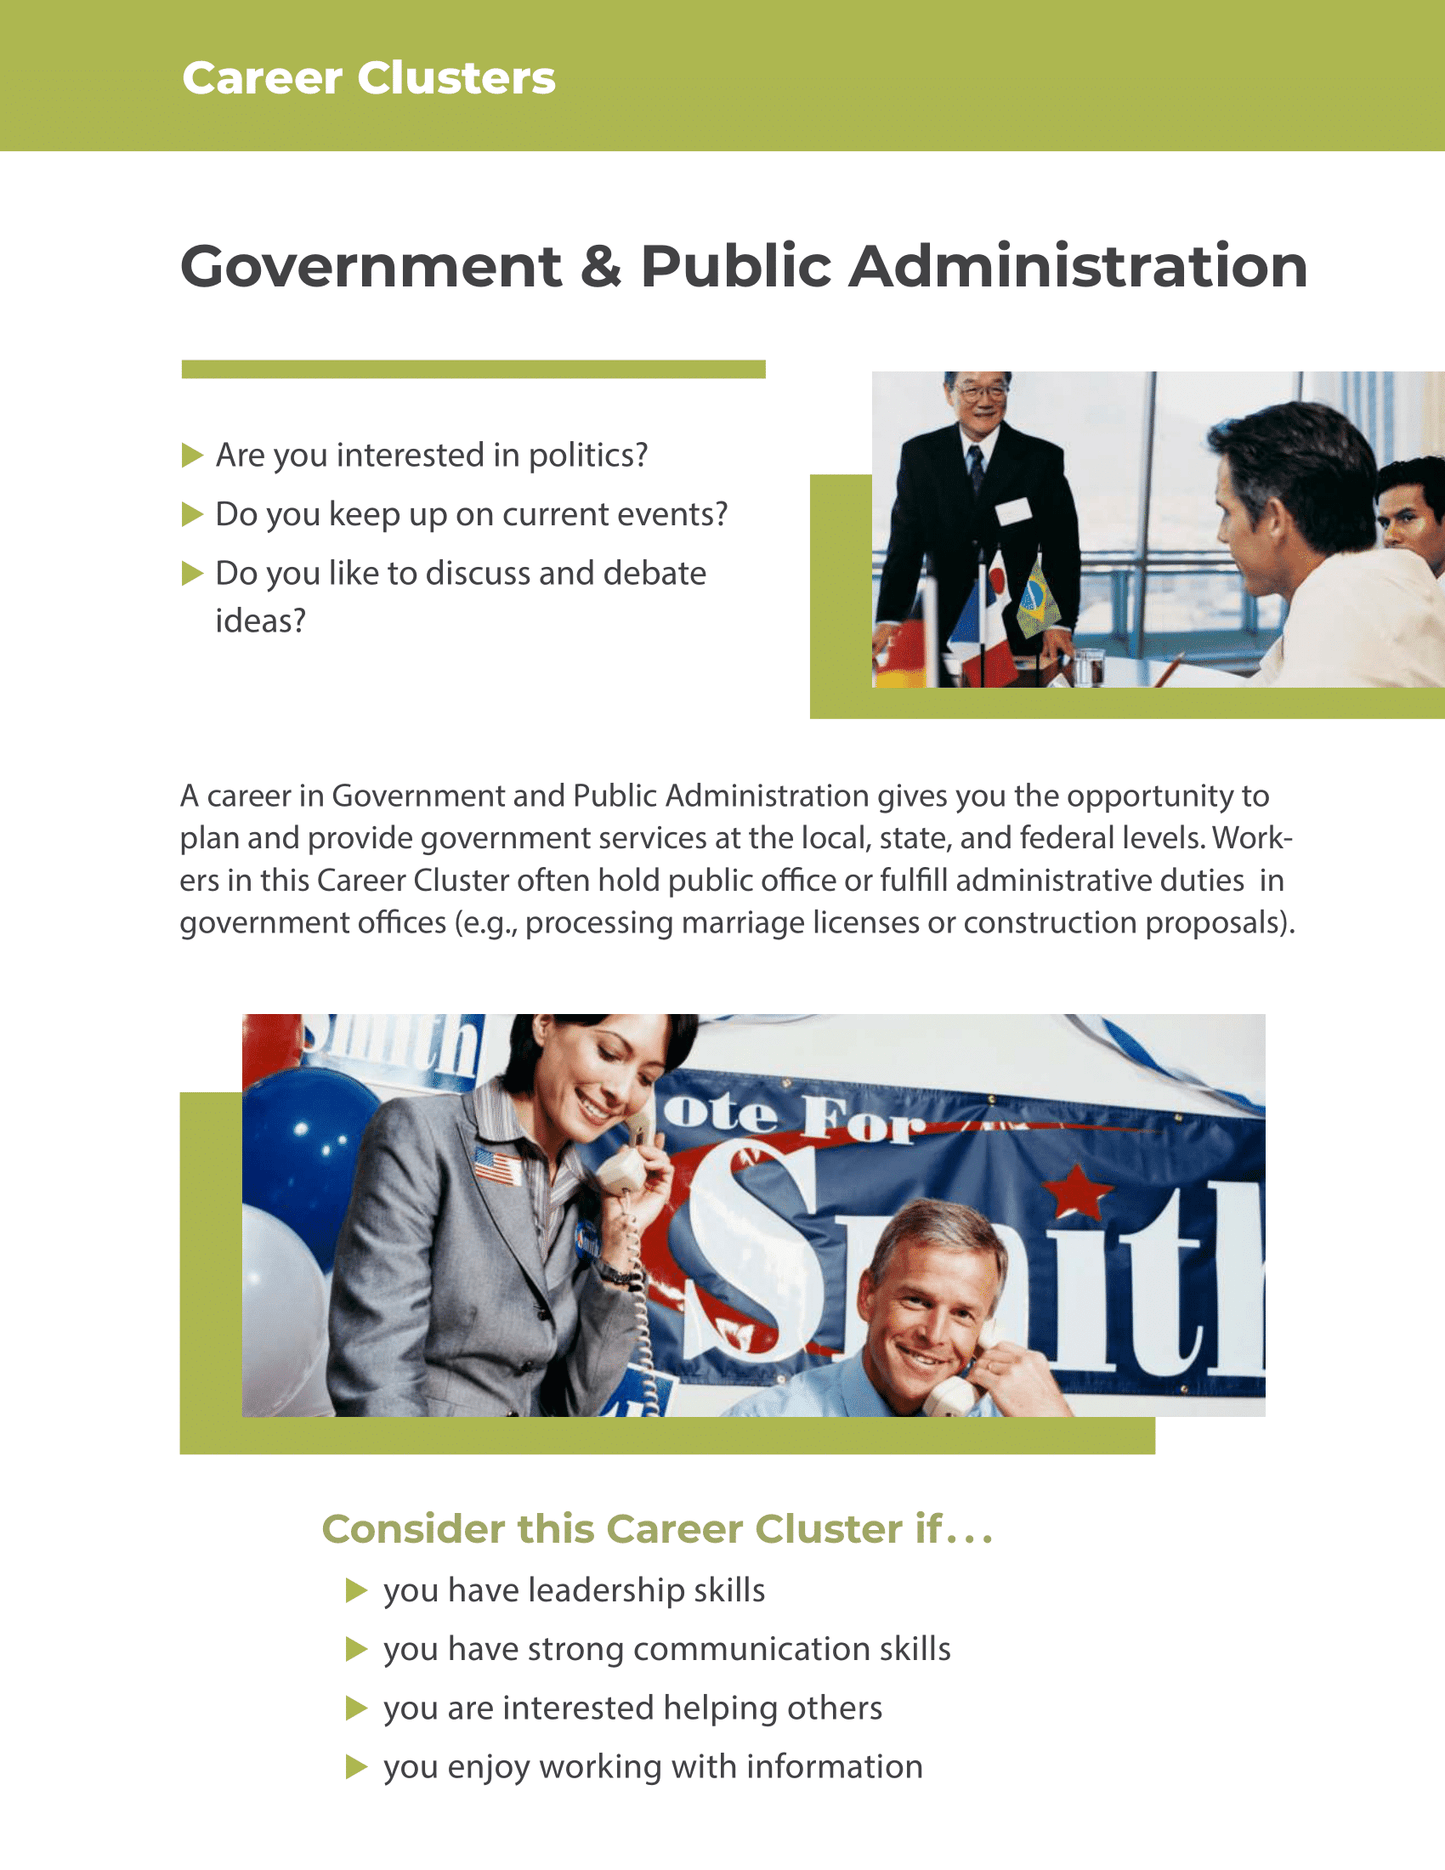 Career Clusters - Government and Public Administration